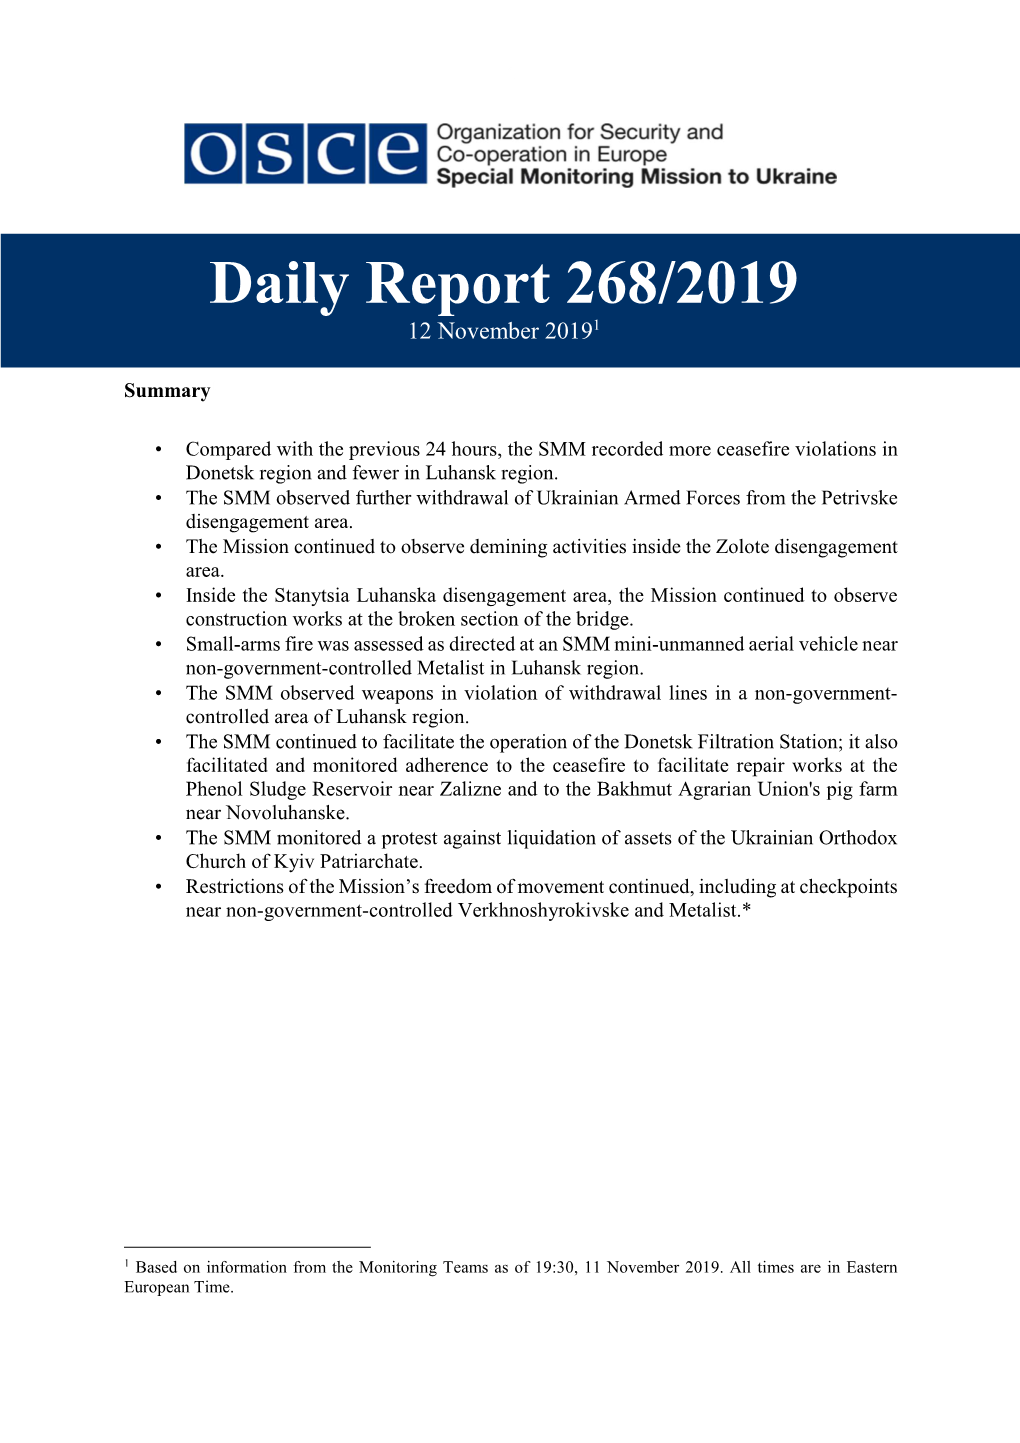 2019-11-12 Daily Report UPD